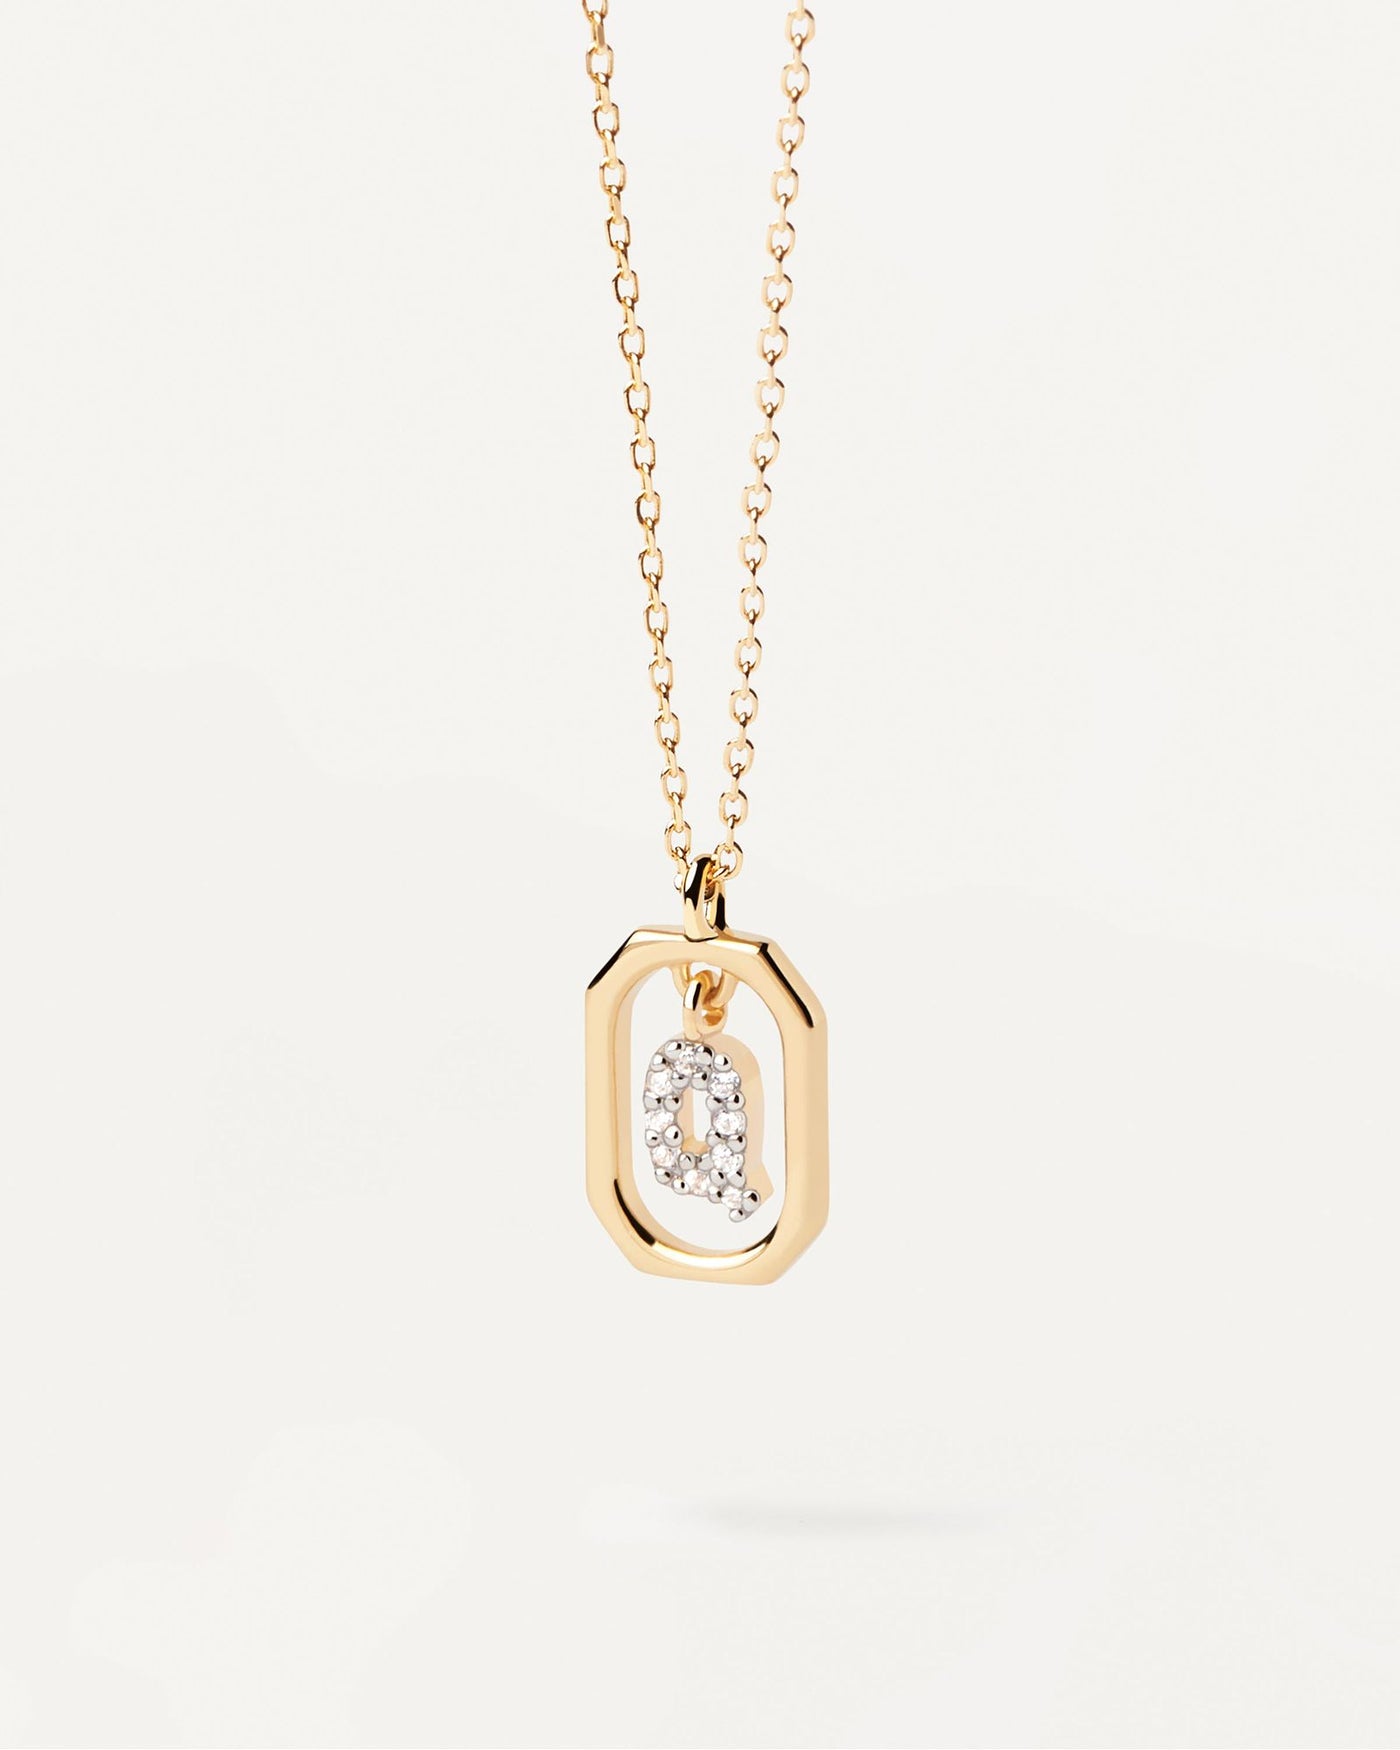 2024 Selection | Mini Letter Q Necklace. Small initial Q necklace in zirconia inside gold-plated silver octagonal pendant. Get the latest arrival from PDPAOLA. Place your order safely and get this Best Seller. Free Shipping.